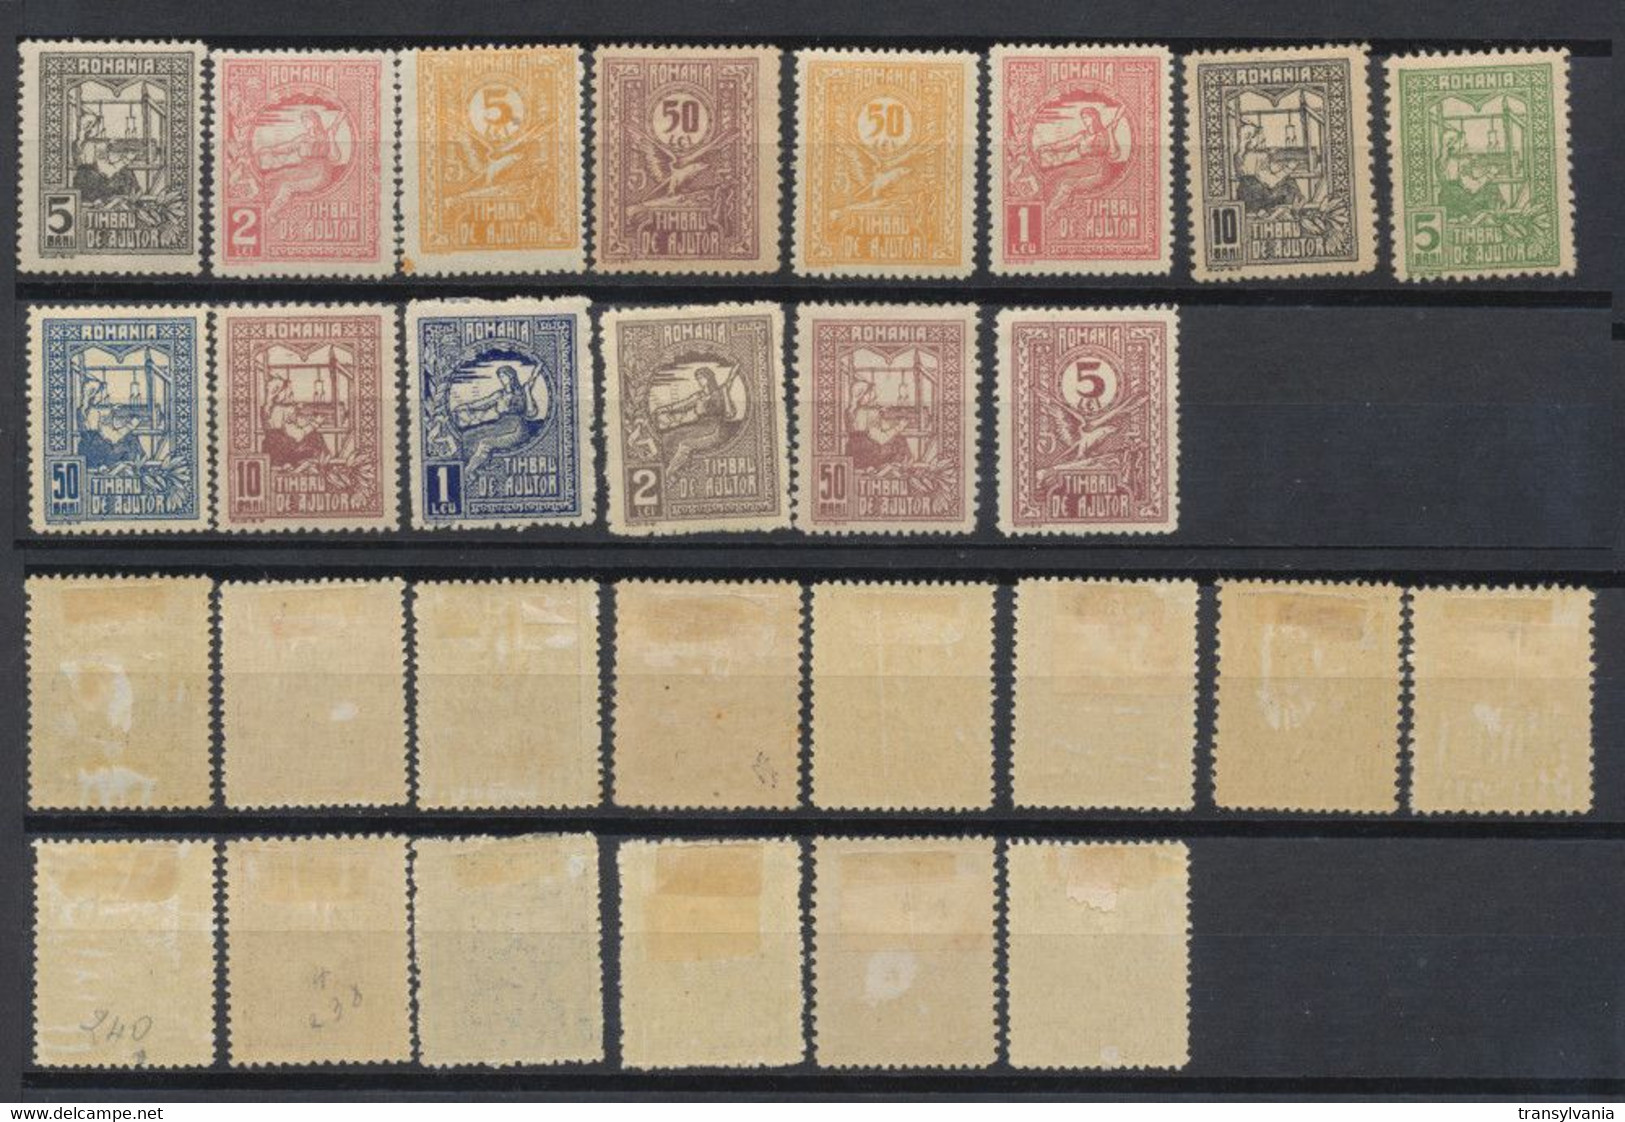 Romania 1916-1918 Rare Set Of 14 Relief Aid Stamps MLH, Only 200 Complete Sets Issued - Plaatfouten En Curiosa